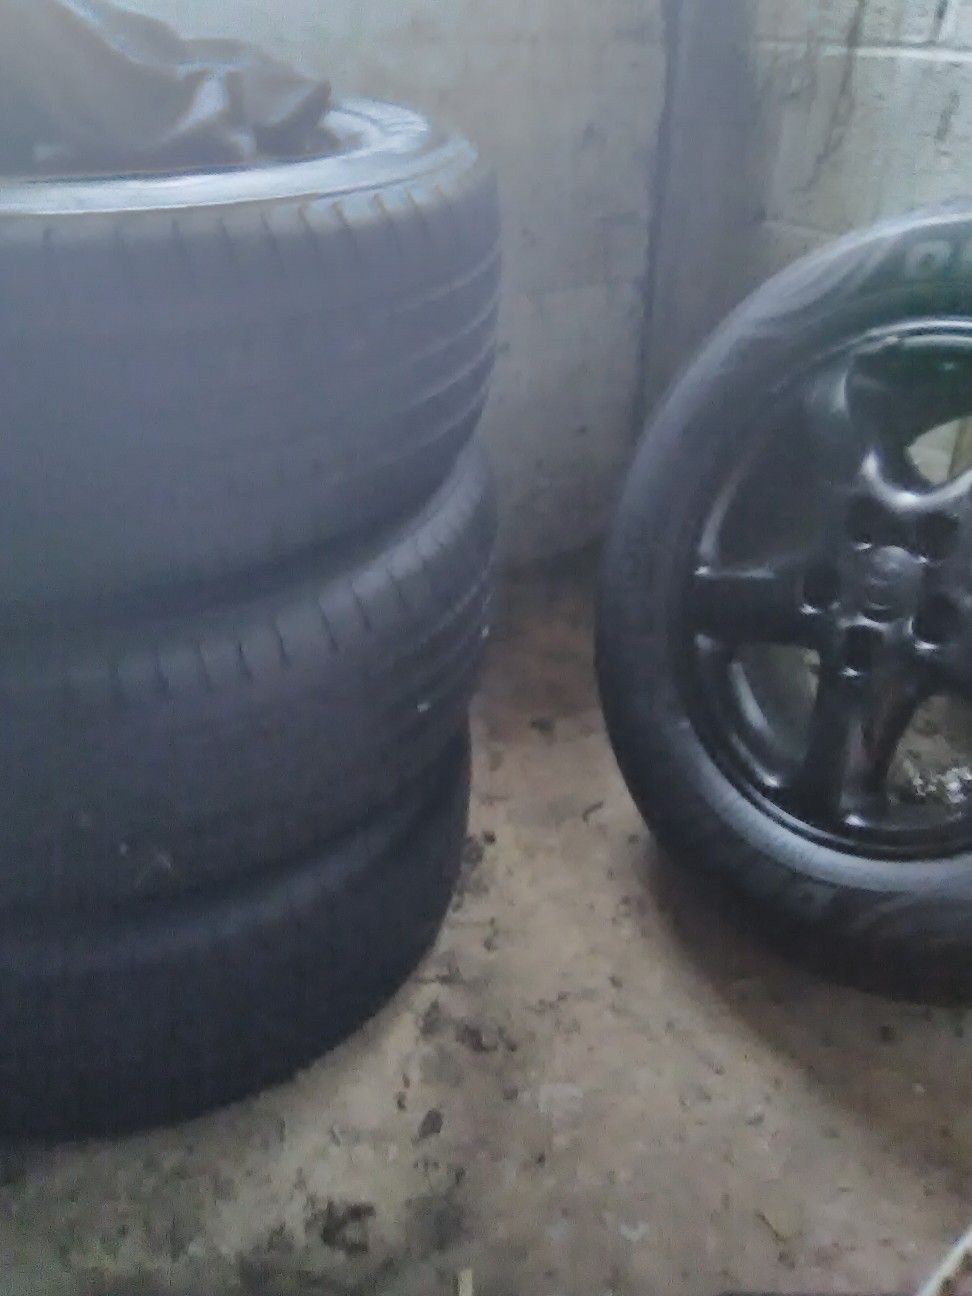 16 inch tires with black rim. All 4 wheels. CASH ONLY!!!!!